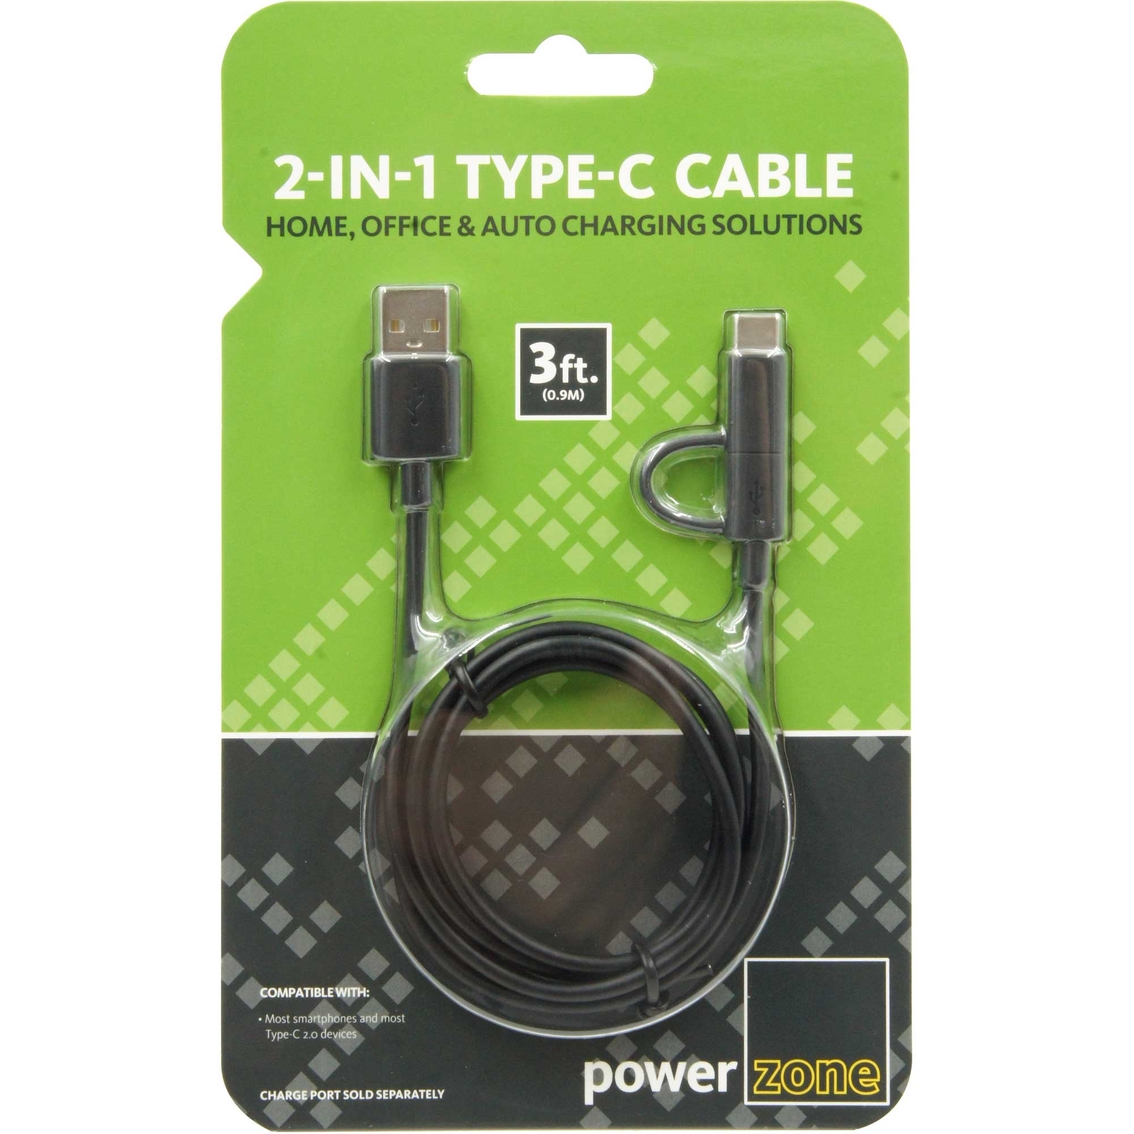 Powerzone 2-in-1 Type C Cable 3 ft. - Image 4 of 5